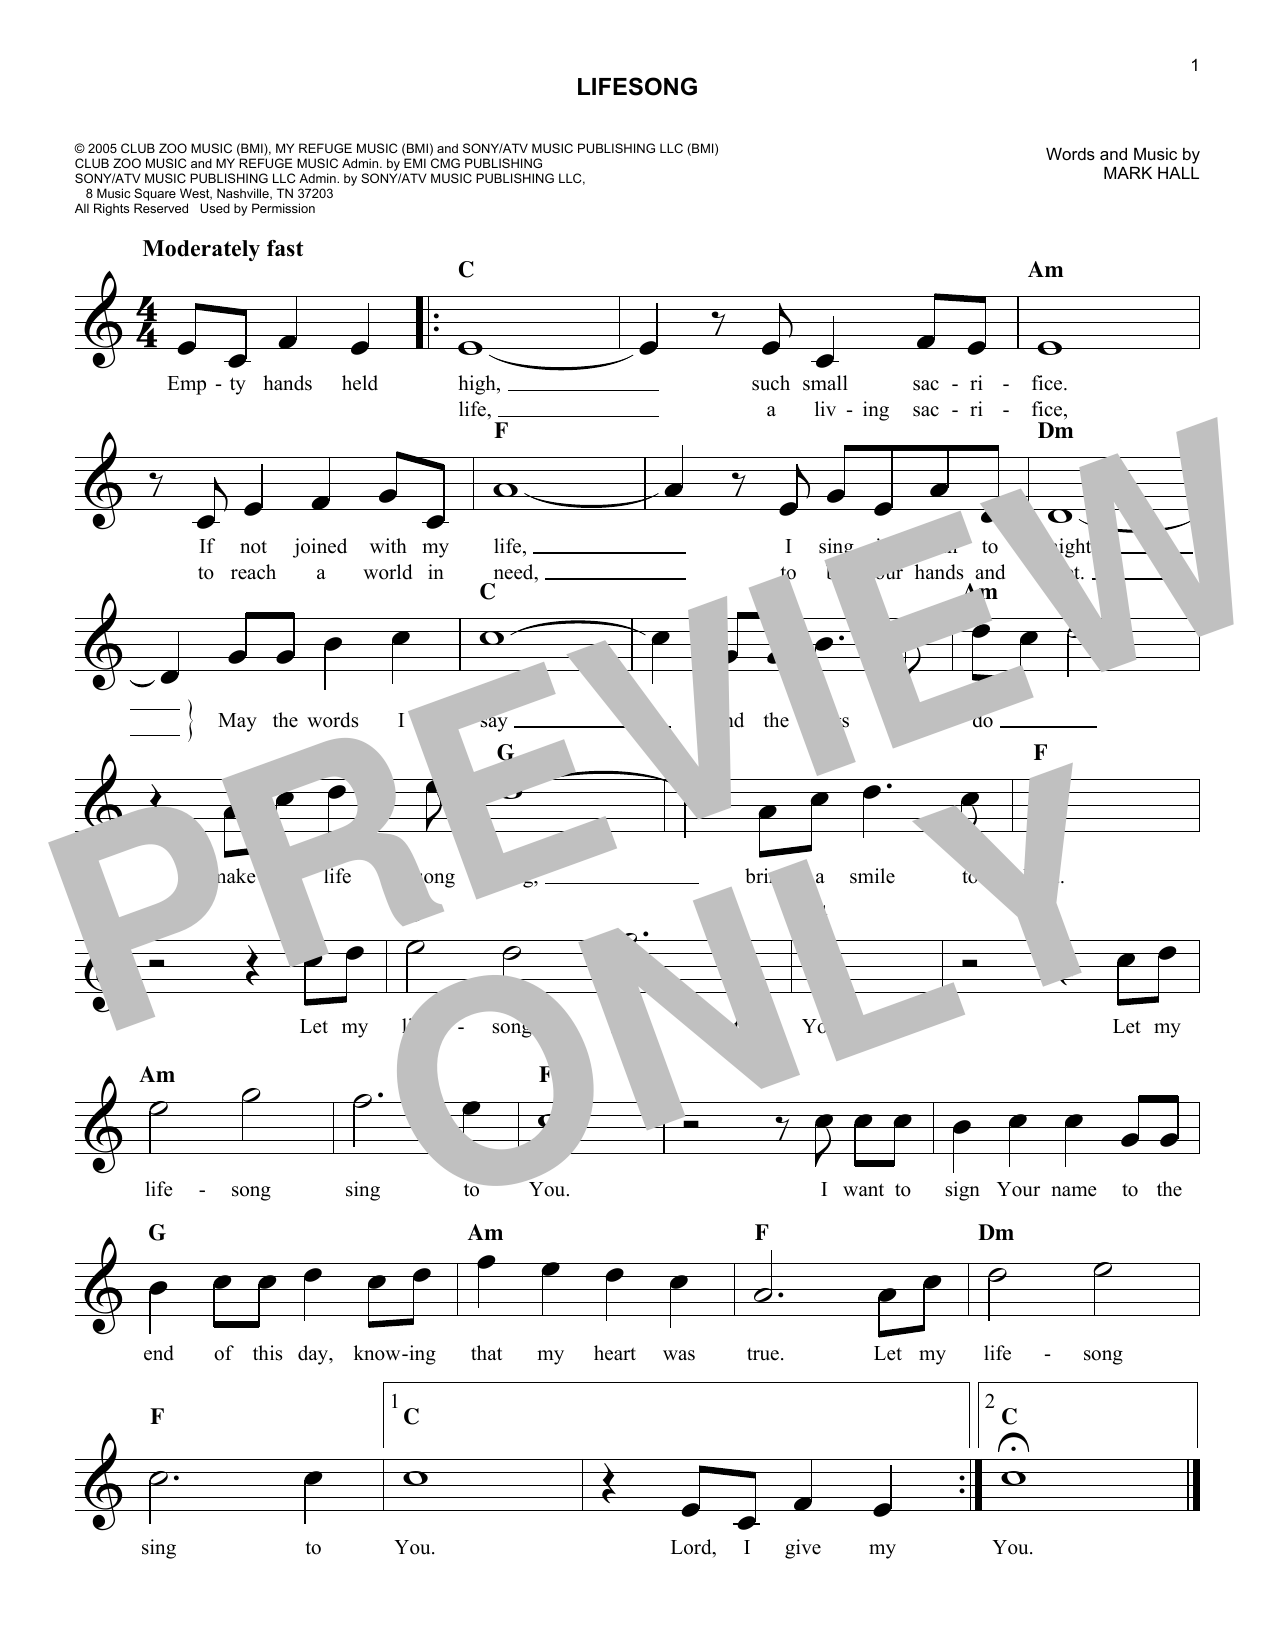 Download Casting Crowns Lifesong Sheet Music